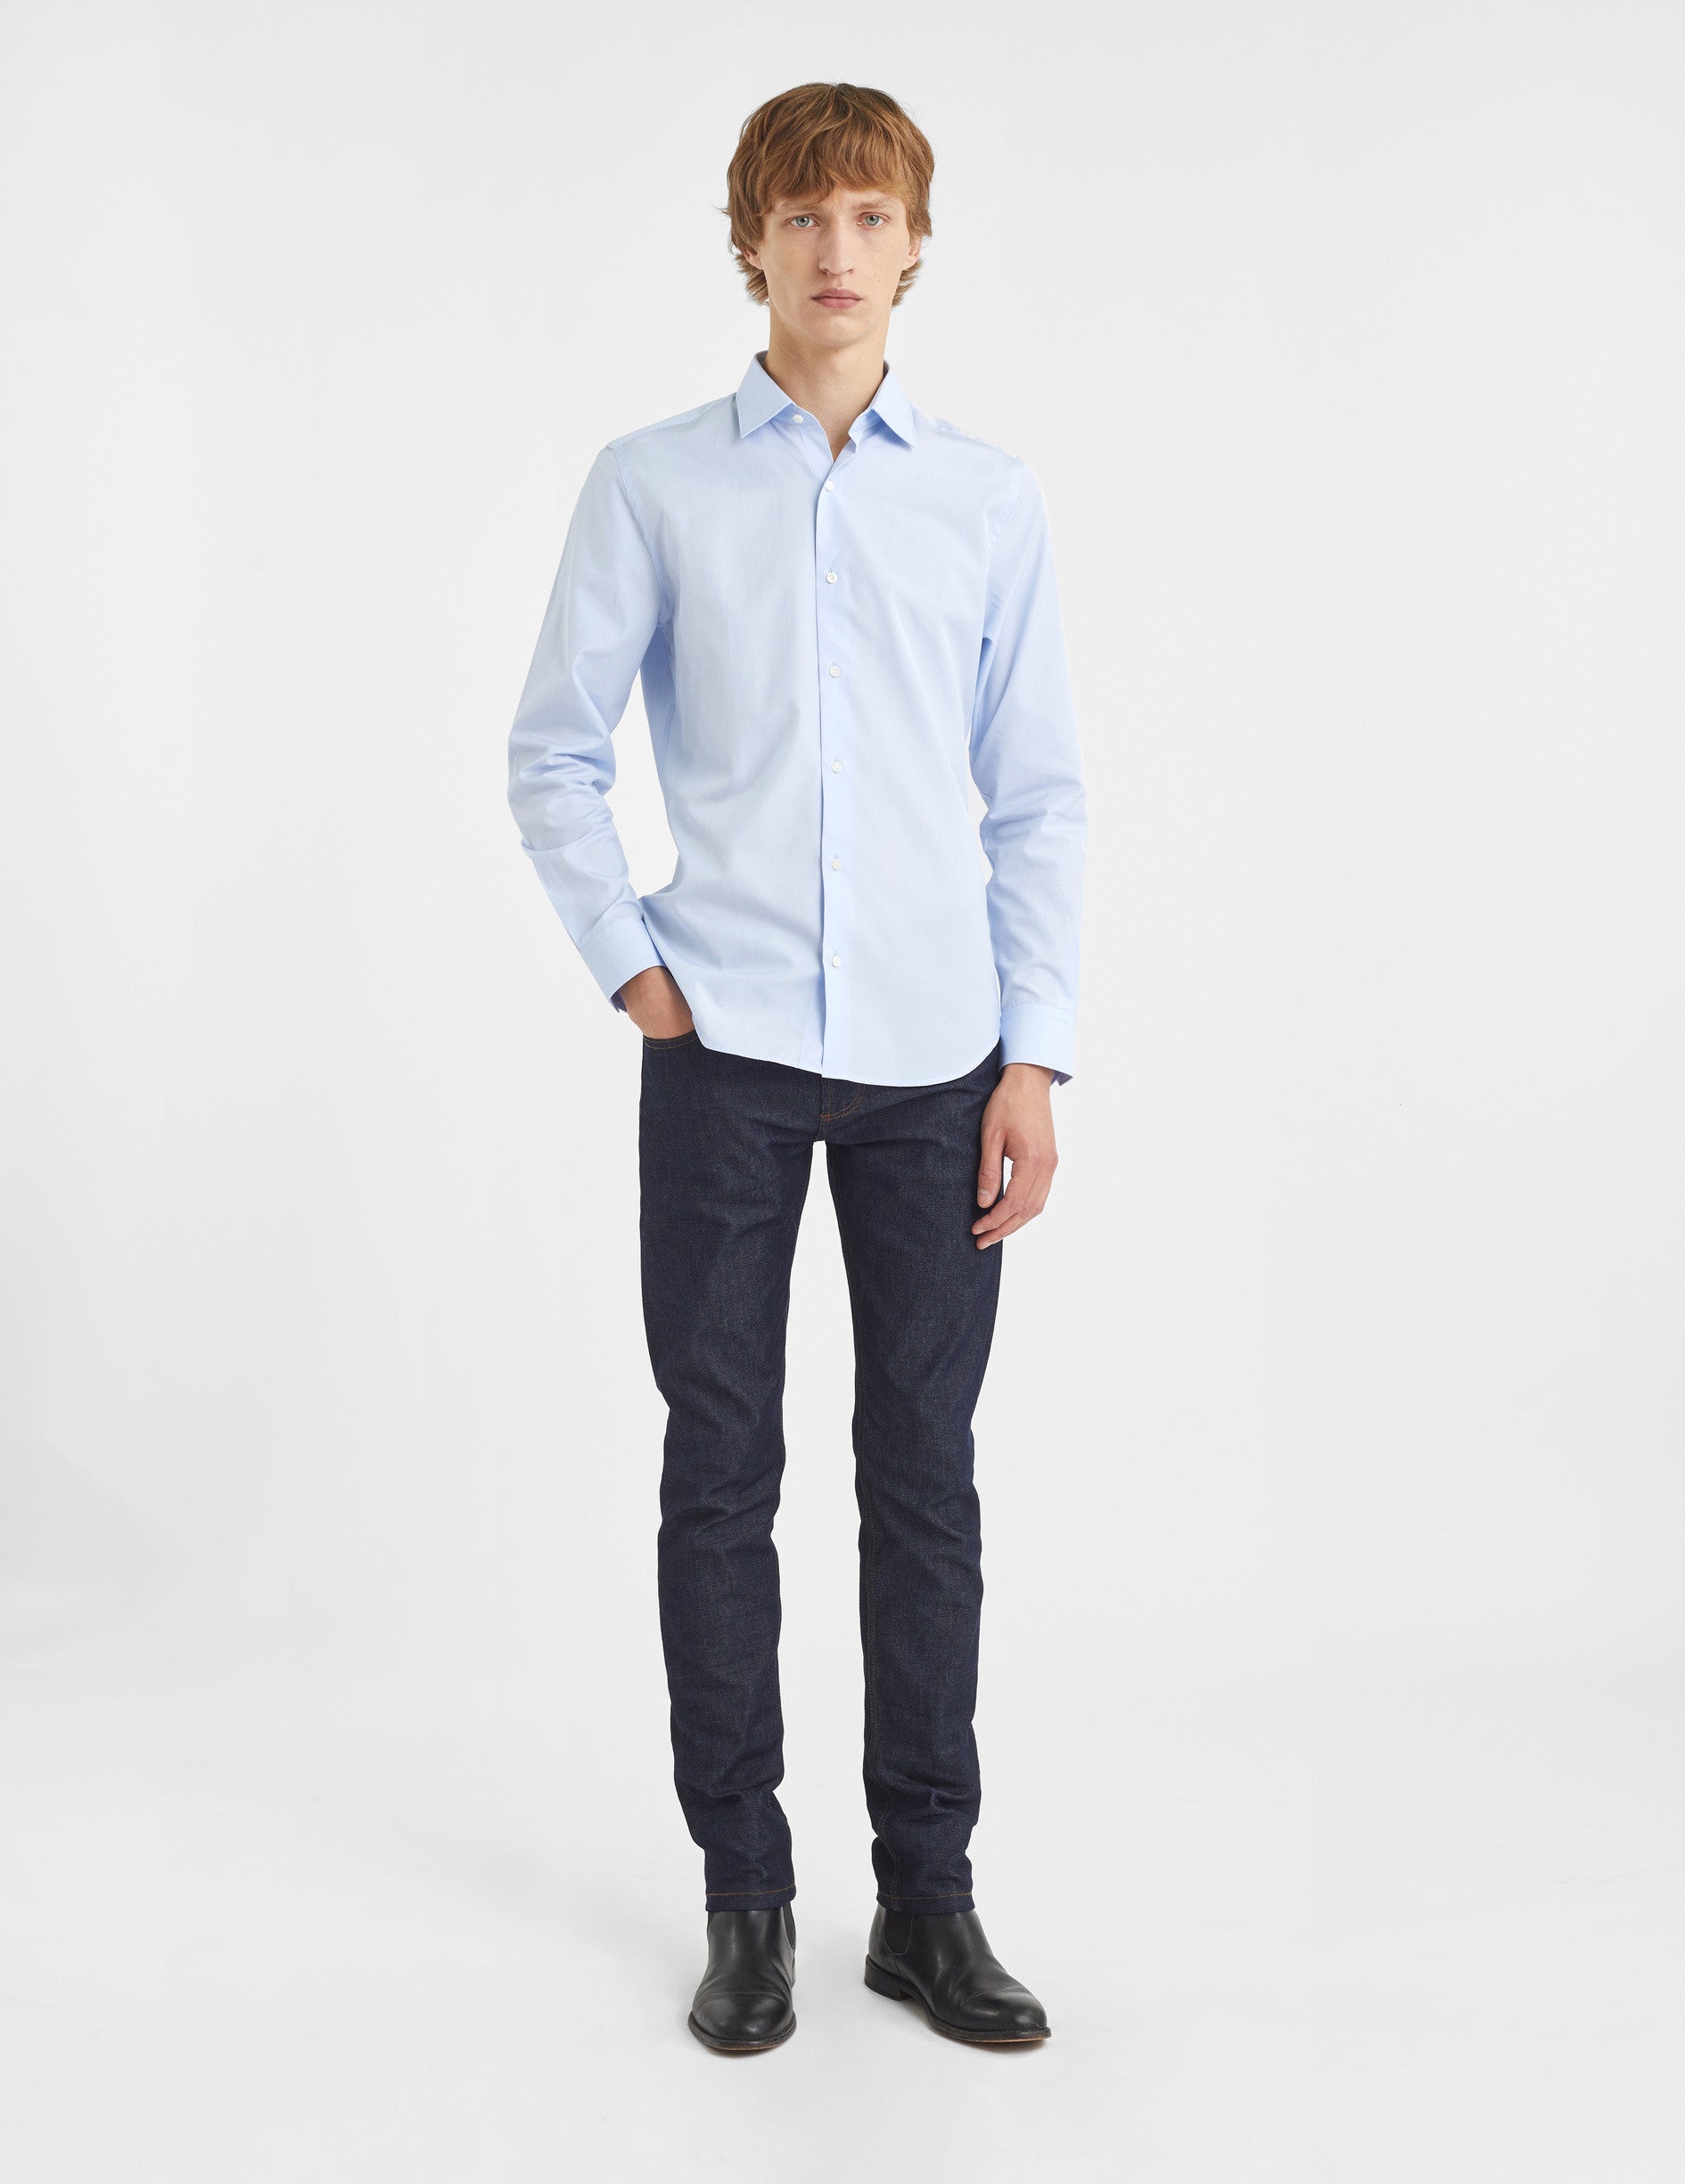 Fitted blue shirt - Wire to wire - Figaret Collar